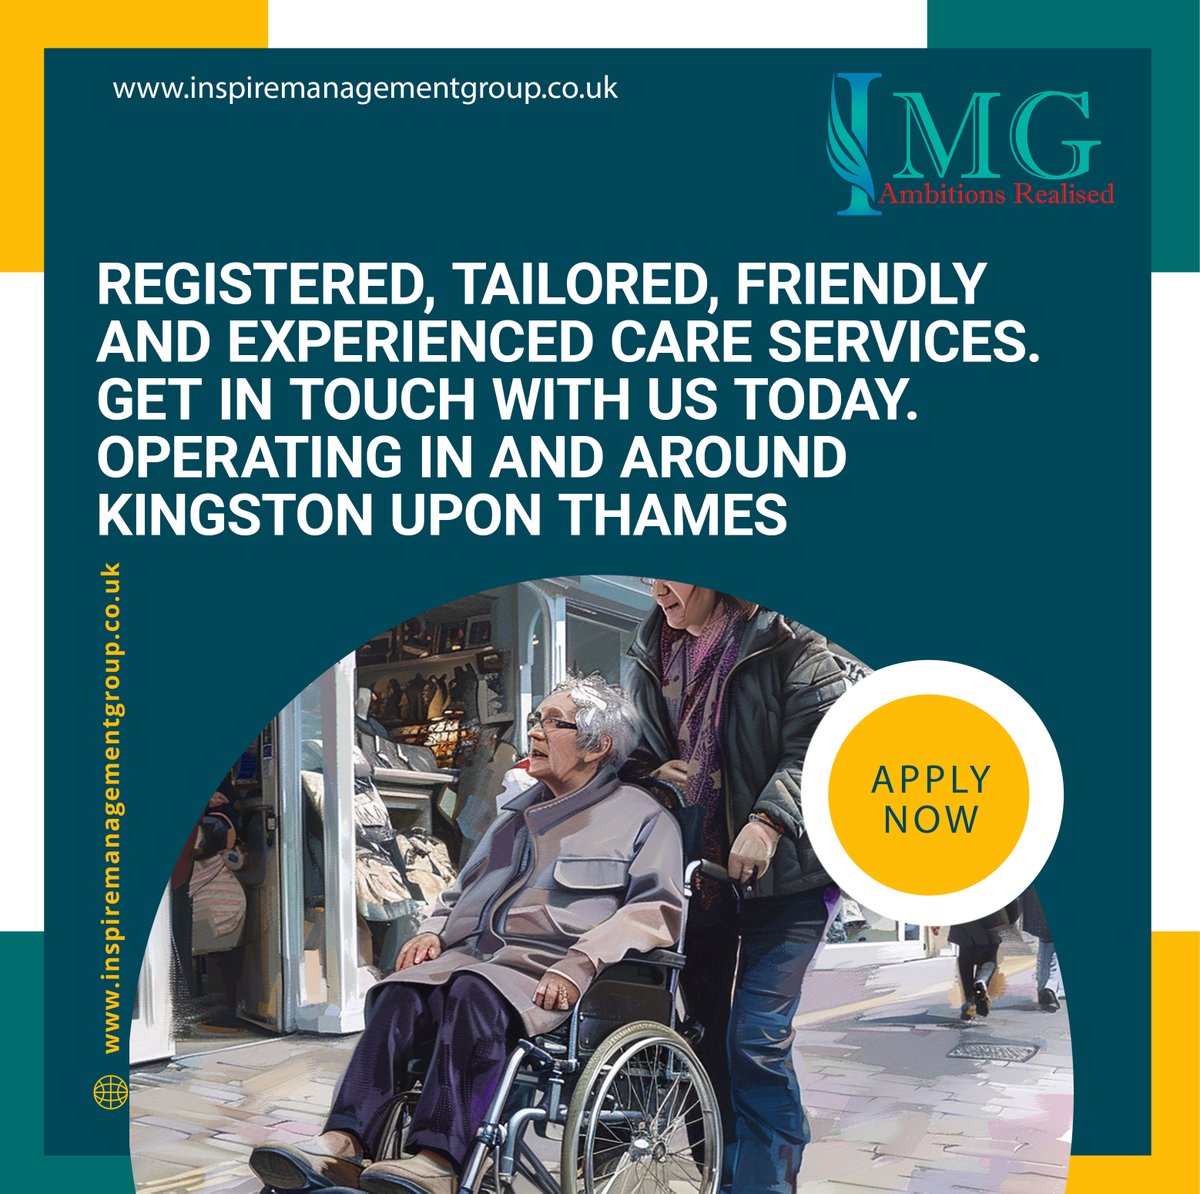 Registered, Tailored and Friendly care services. We adapt our care to suit you and your caring needs. Contact our professional team today if youre looking for the best of care in and around Kingston Upon Thames. inspiremanagementgroup.co.uk #care #carer #careservices #palliativecare